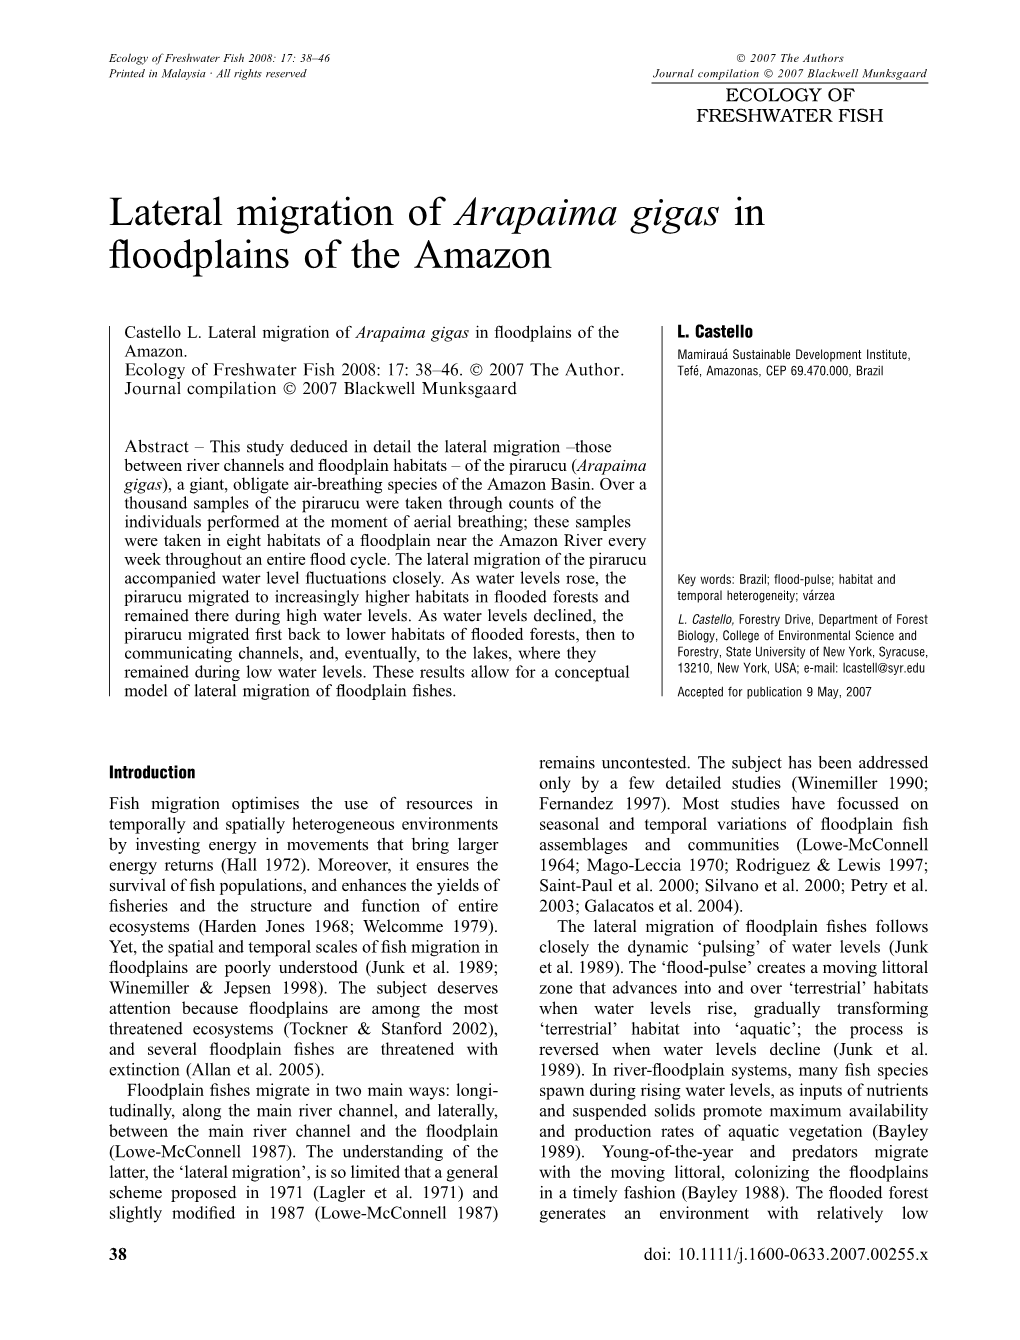 Lateral Migration of Arapaima Gigas in Floodplains of the Amazon